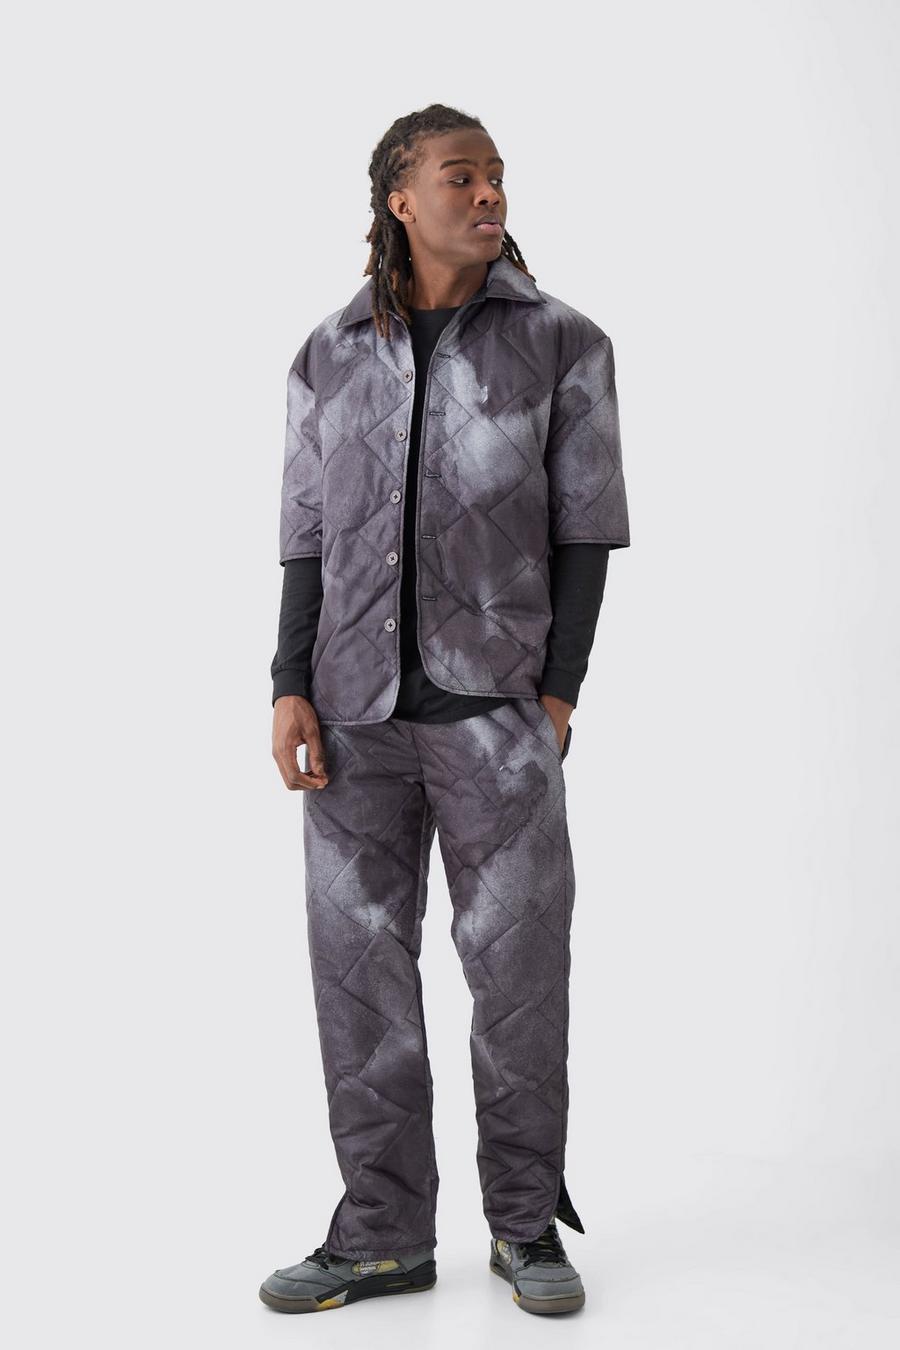 Black Square Quilted Tie Dye Shirt long-sleeved &Trouser Set image number 1